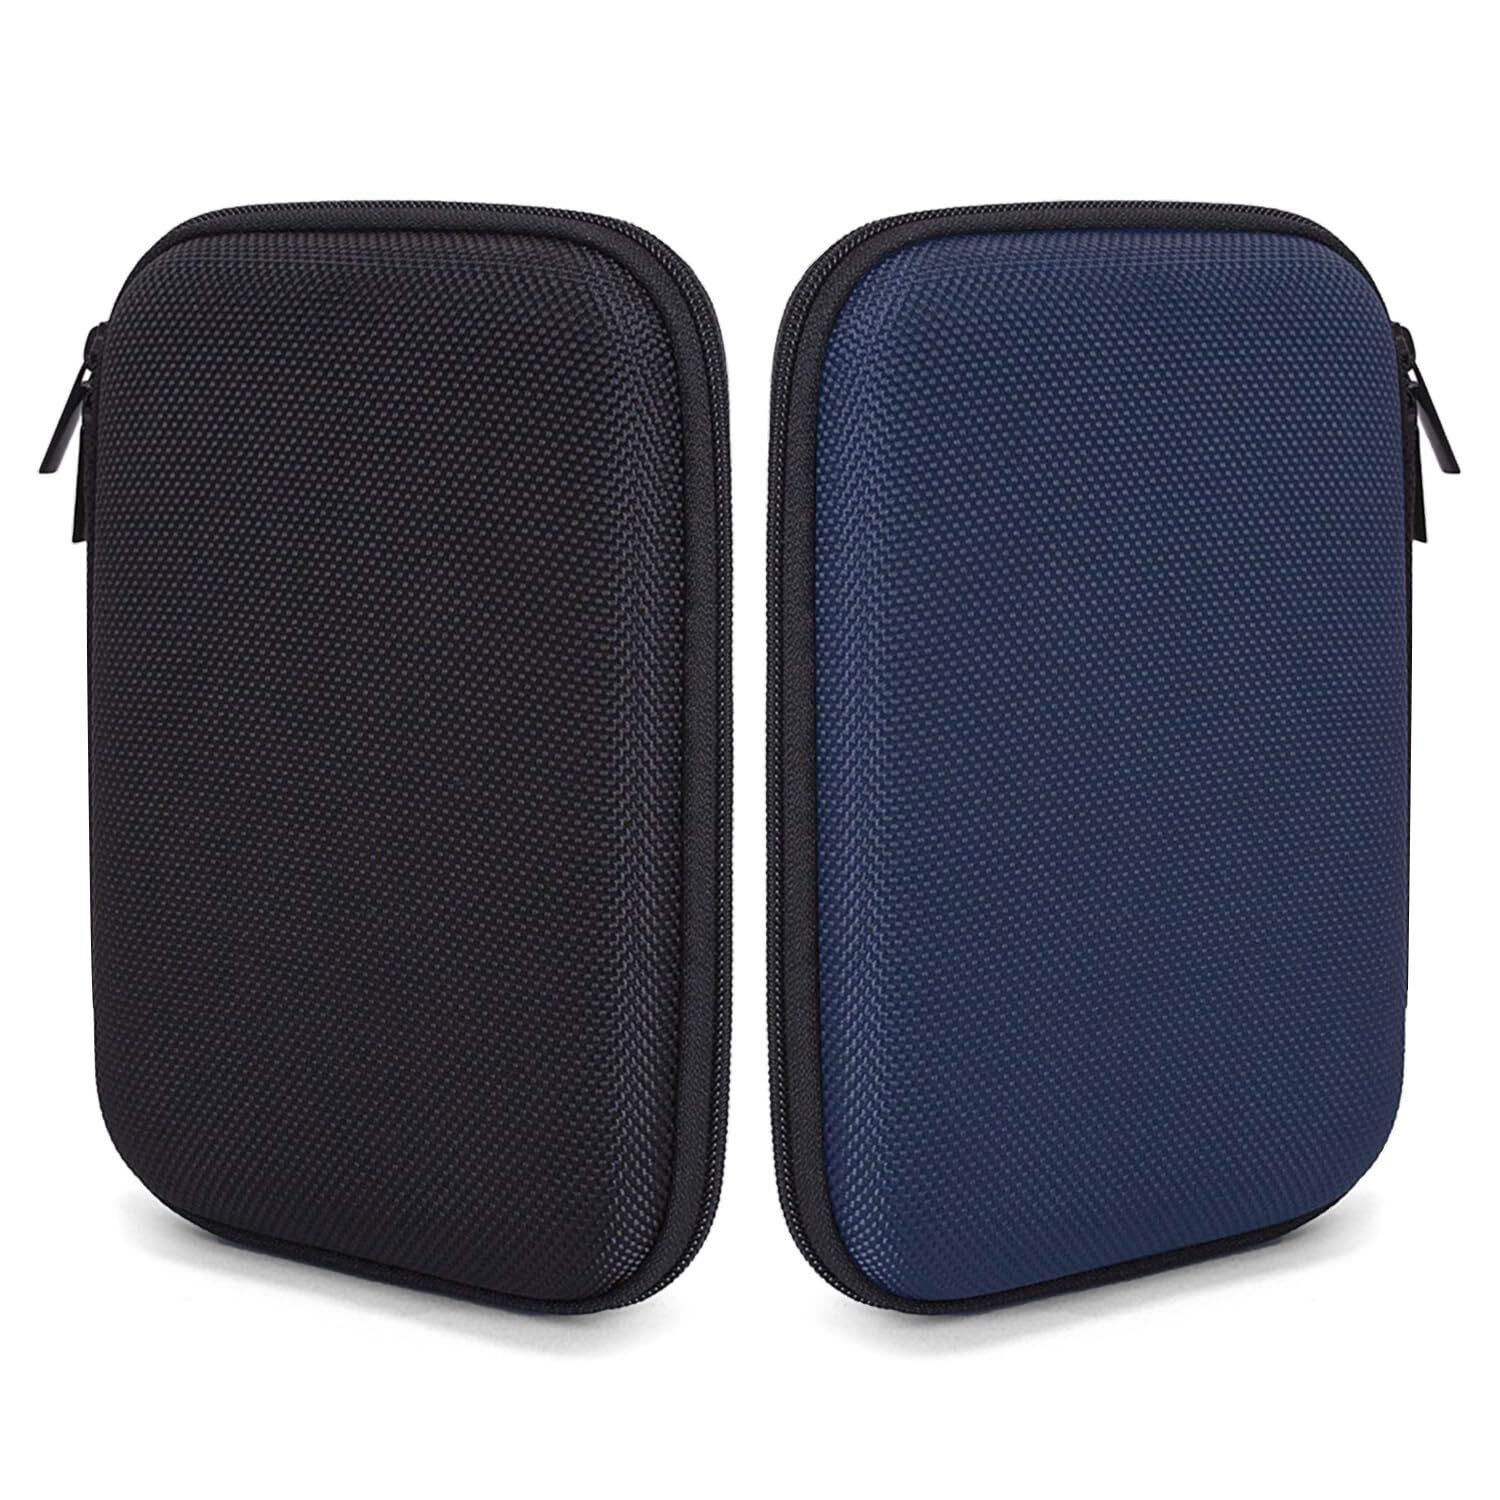 2Pcs Eva Hard Carrying Case For Portable External Hard Drive Power Bank Charge